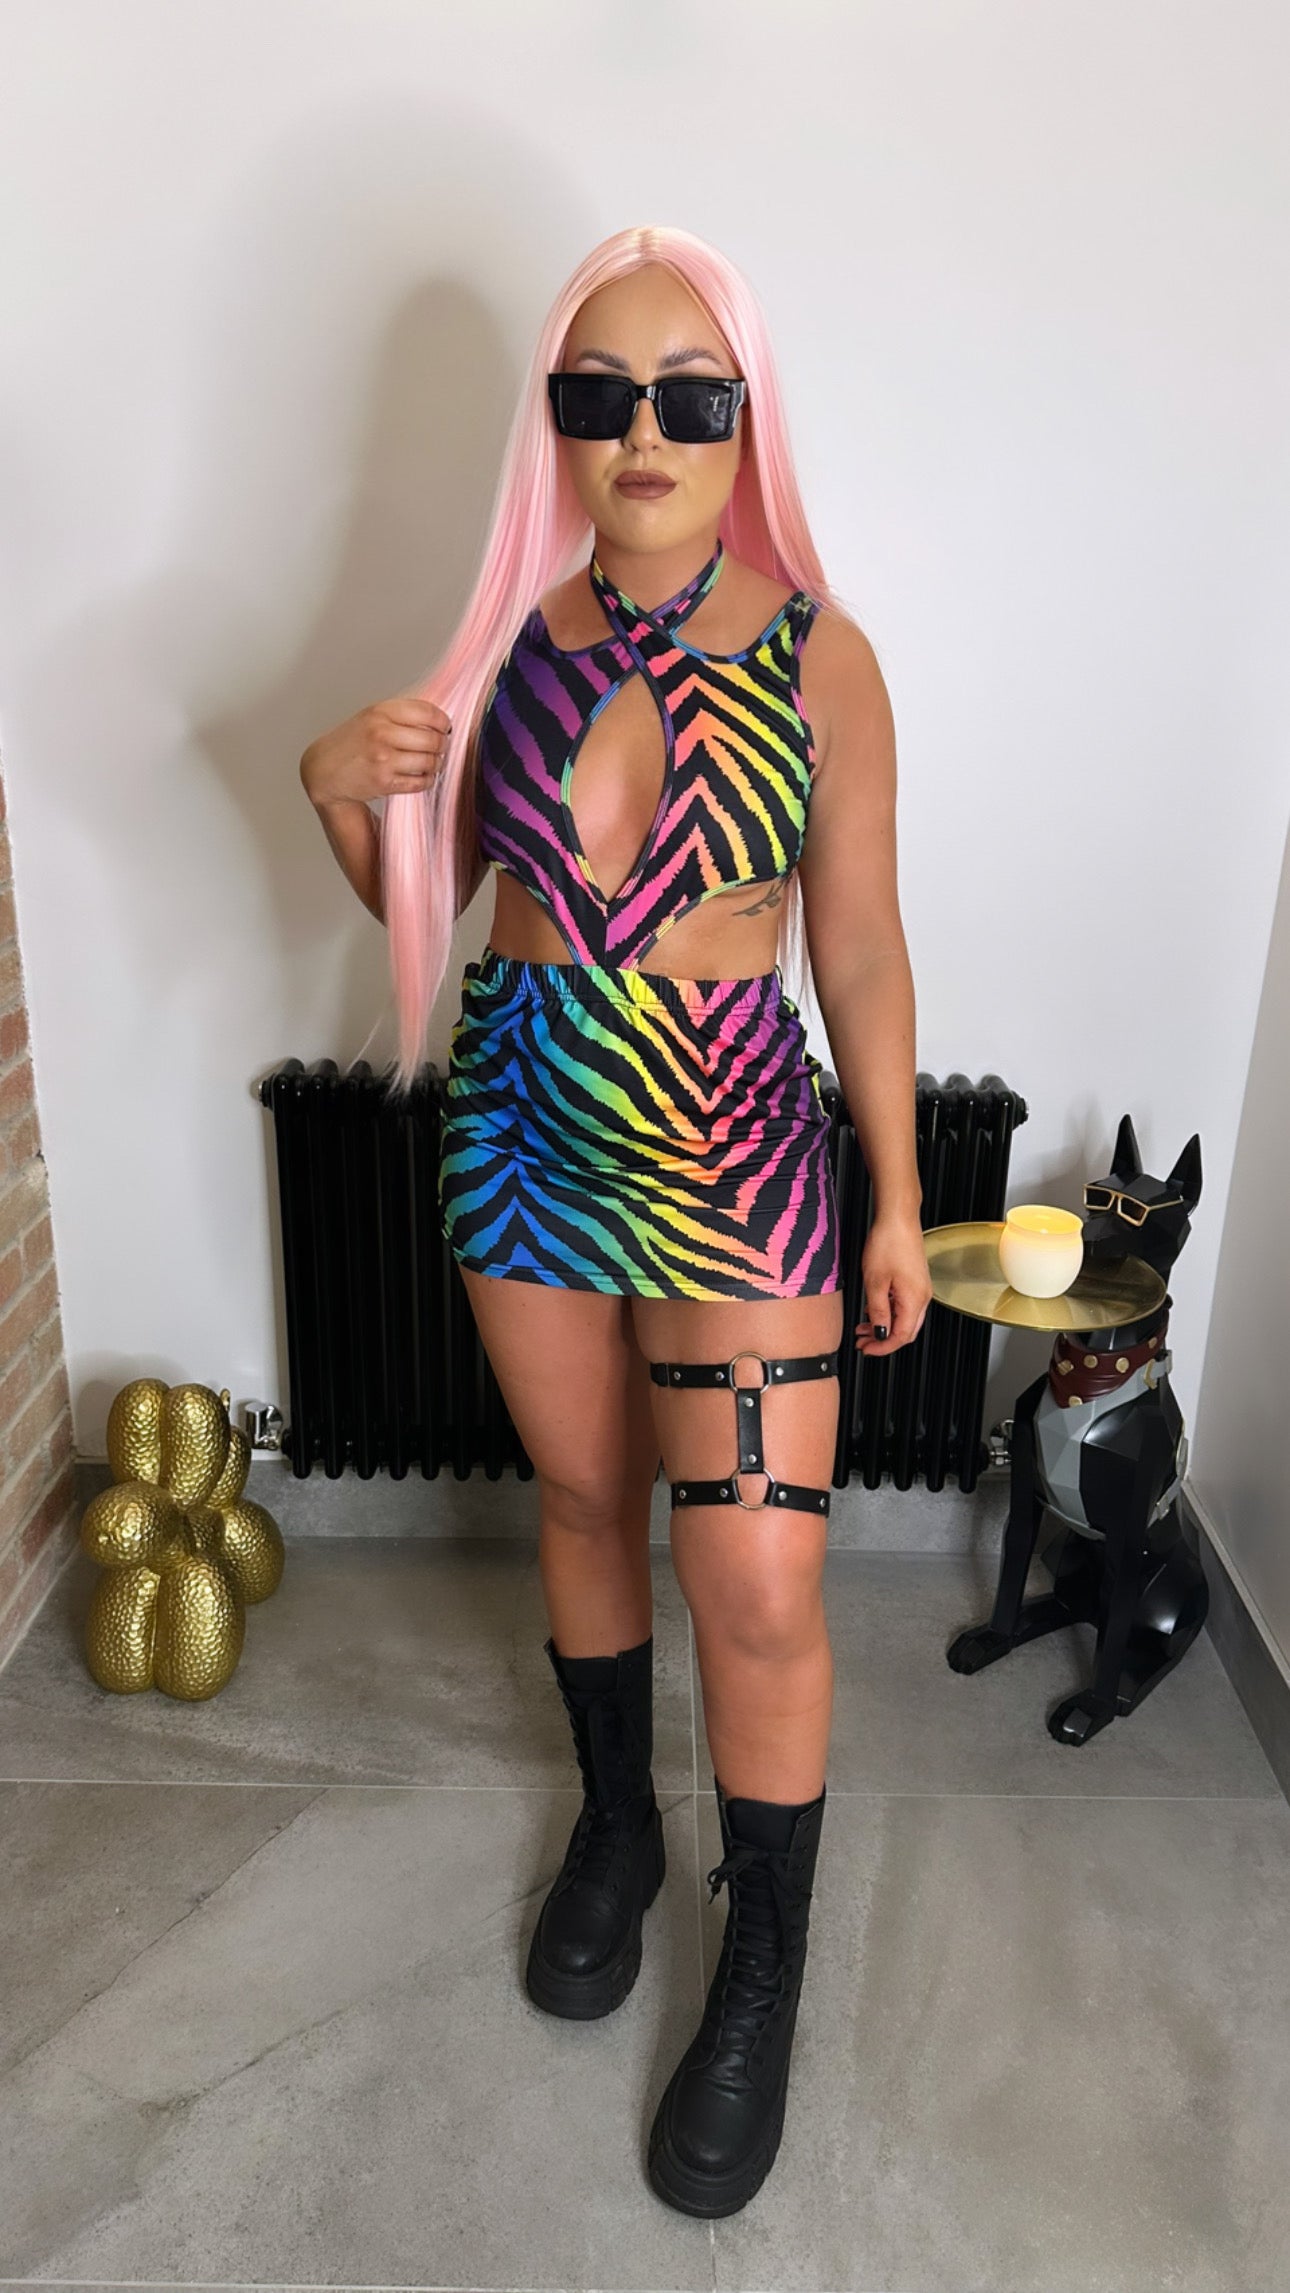 TIGER LILLY DRESS, CUT OUT FESTIVAL DRESS, RAVE OUTFIT